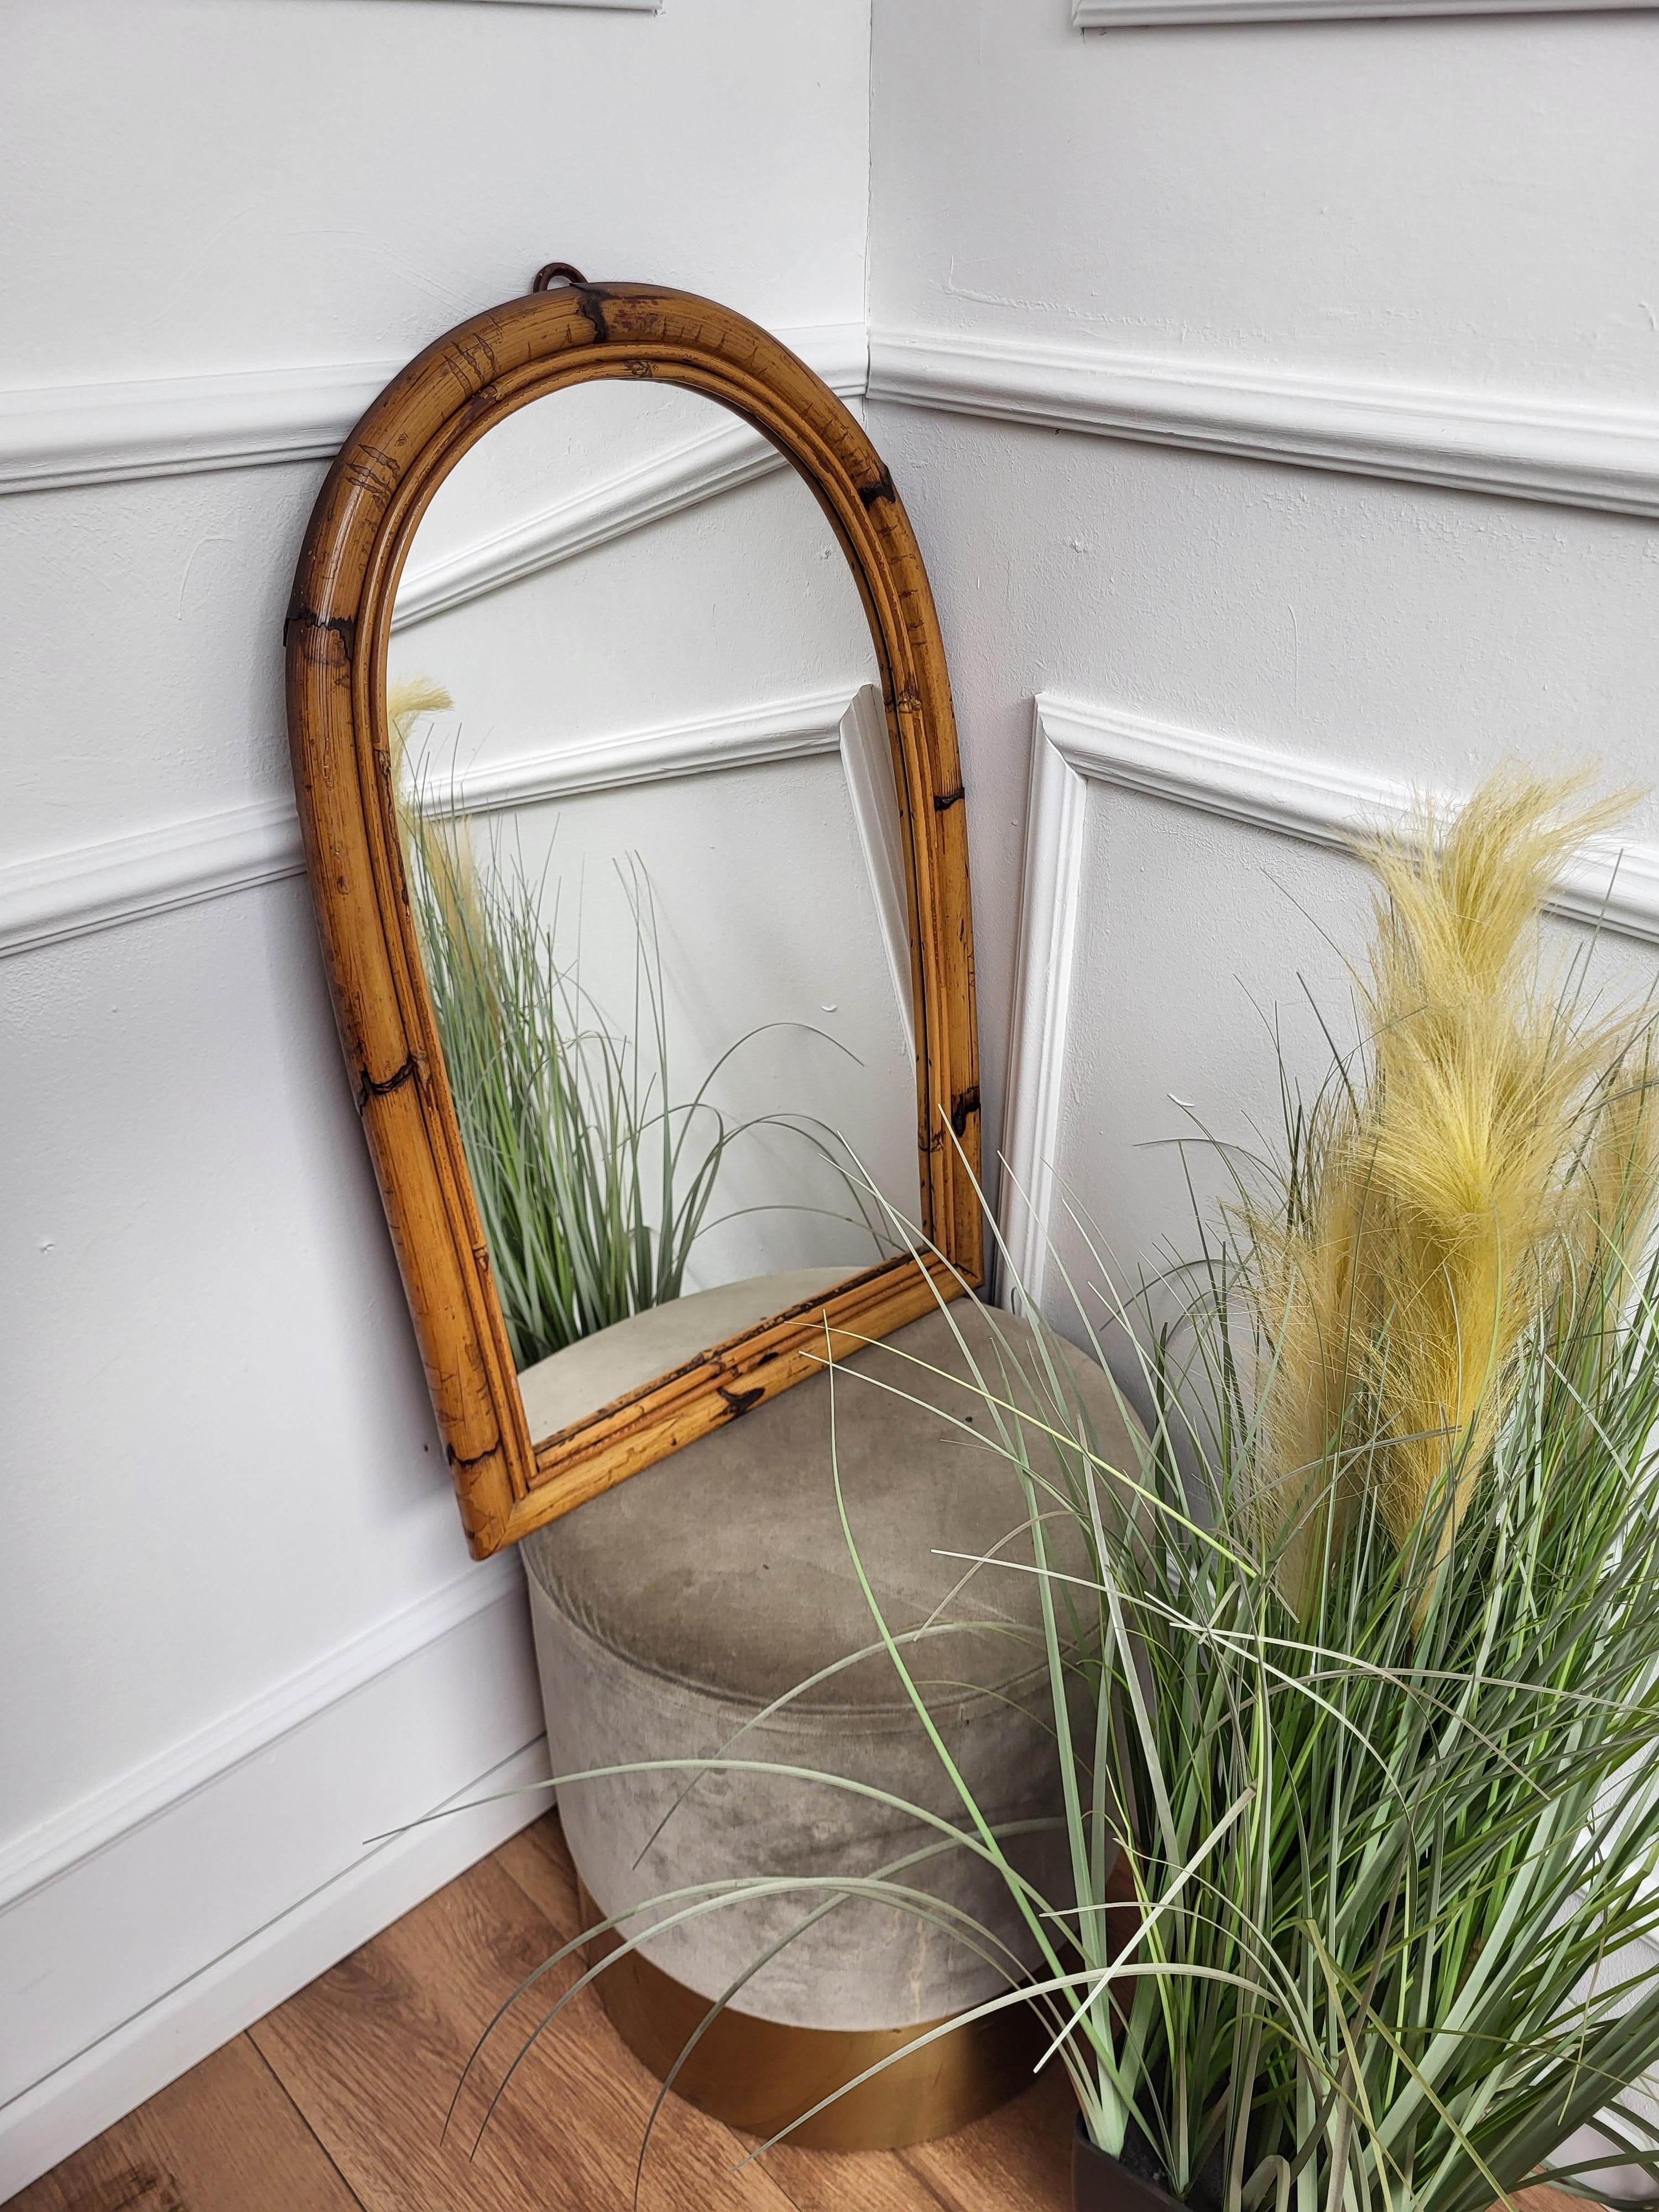 French Provincial 1960s Italian Bamboo Rattan Bohemian French Riviera Arched Wall Mirror For Sale